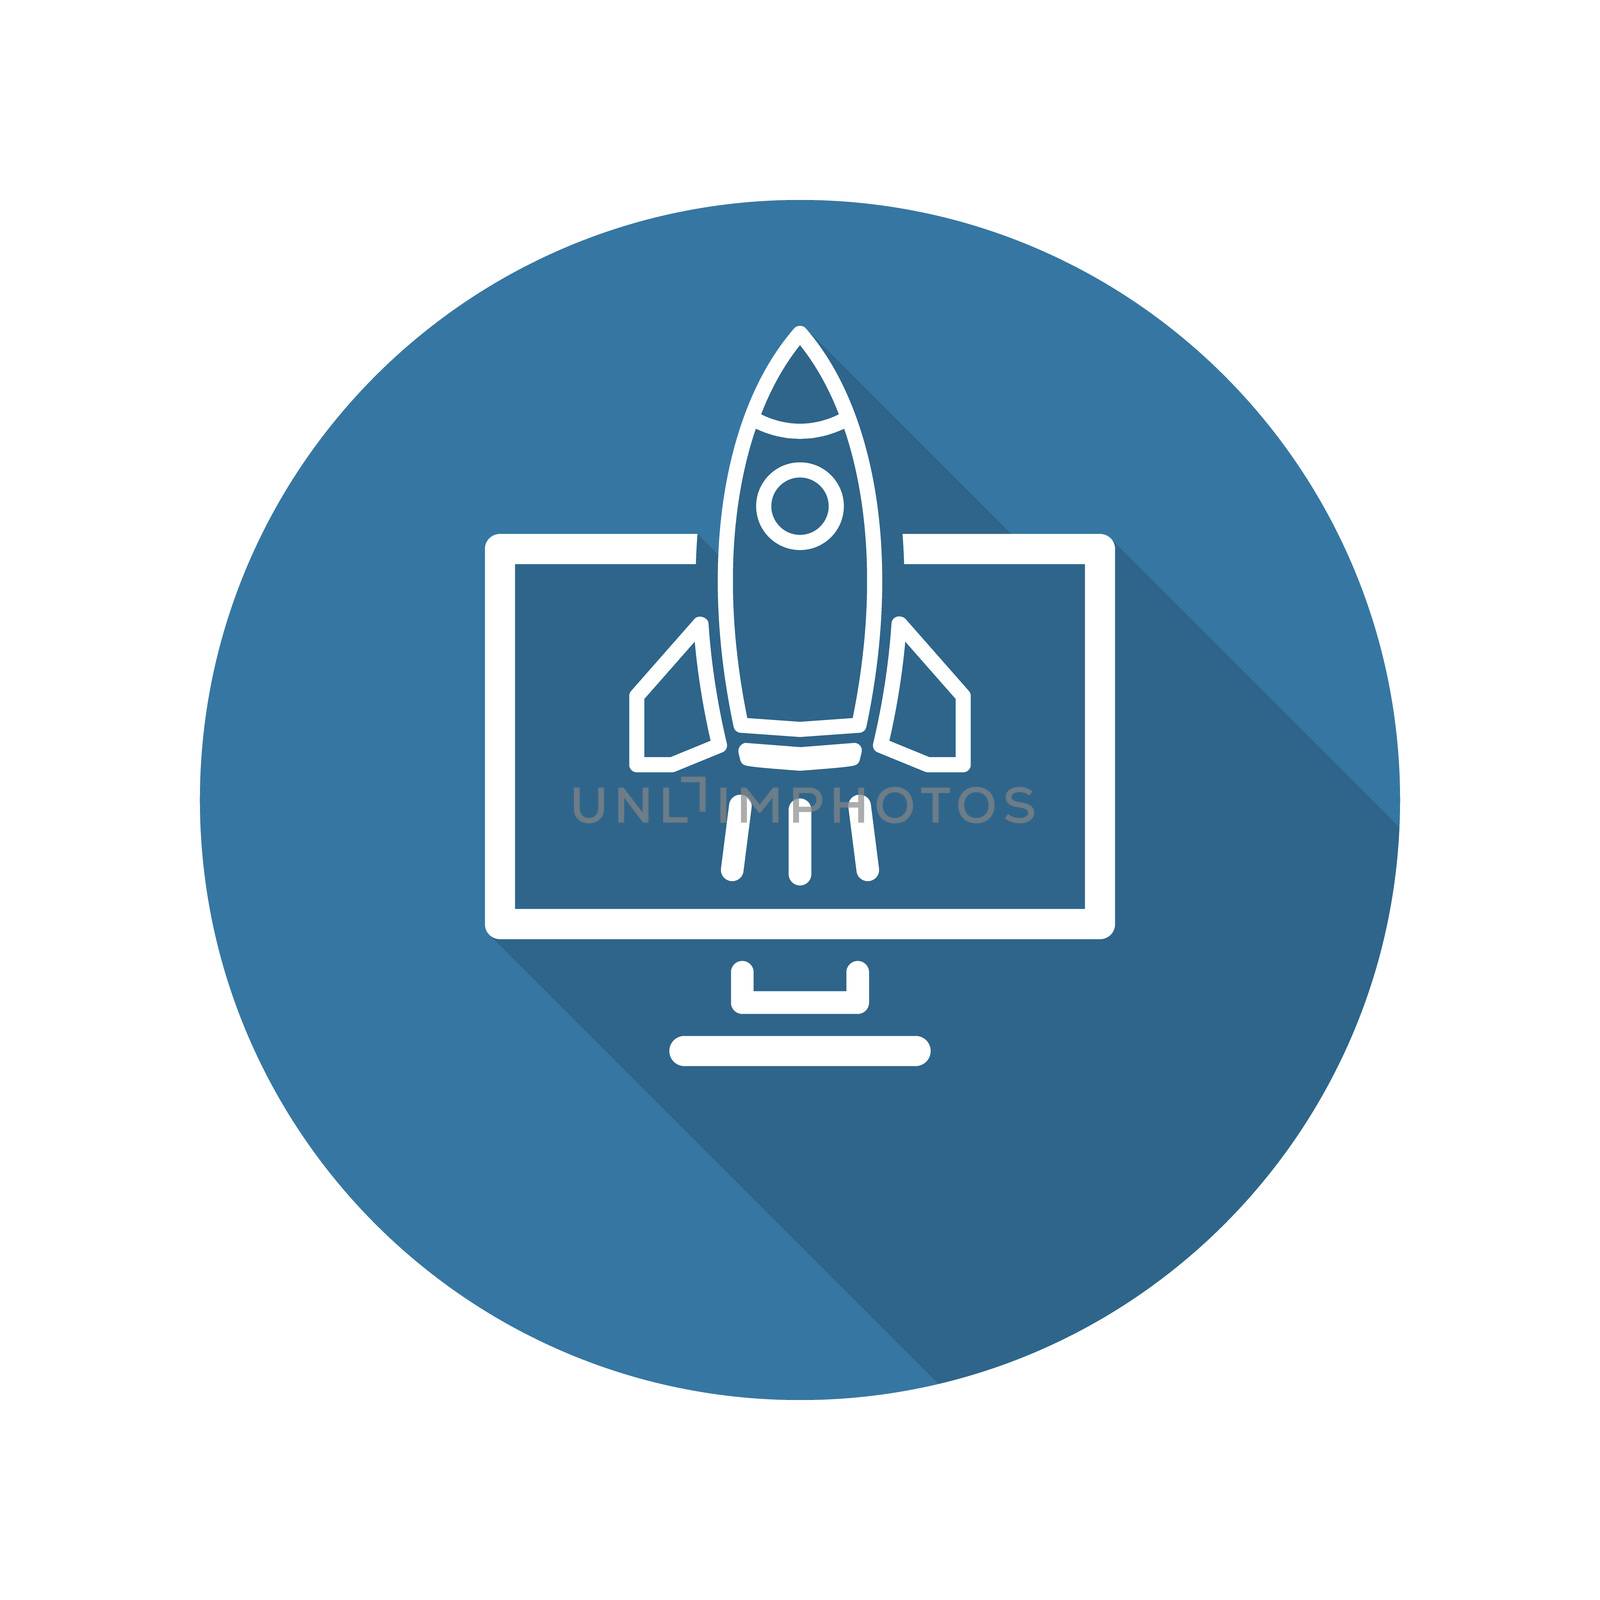 Business Start-up Icon. Concept. Flat Design. Long Shadow. Isolated Illustration. Rocket Launch.